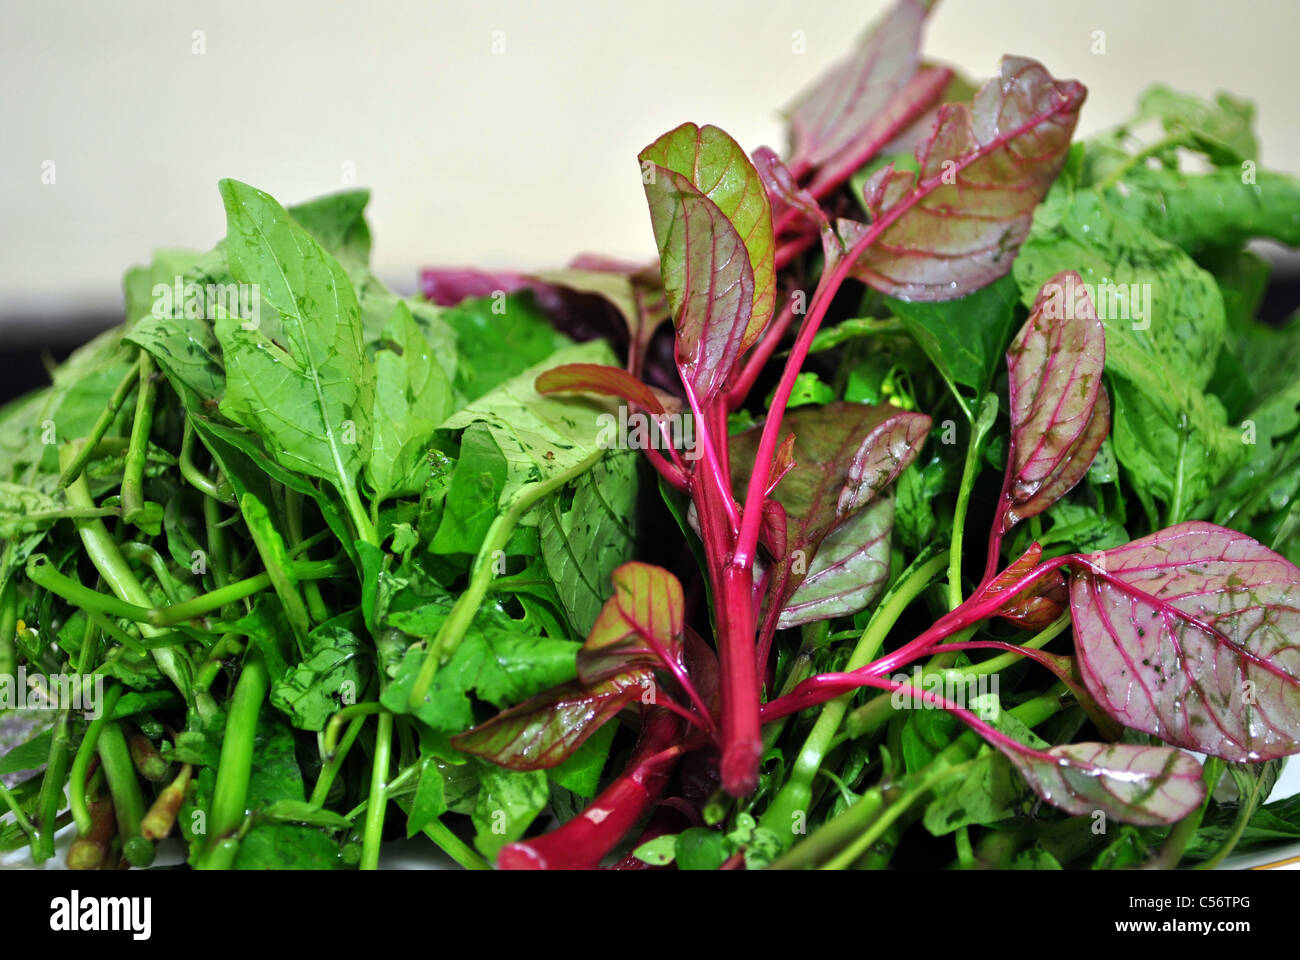 An assortment of green leafy vegetables Stock Photo